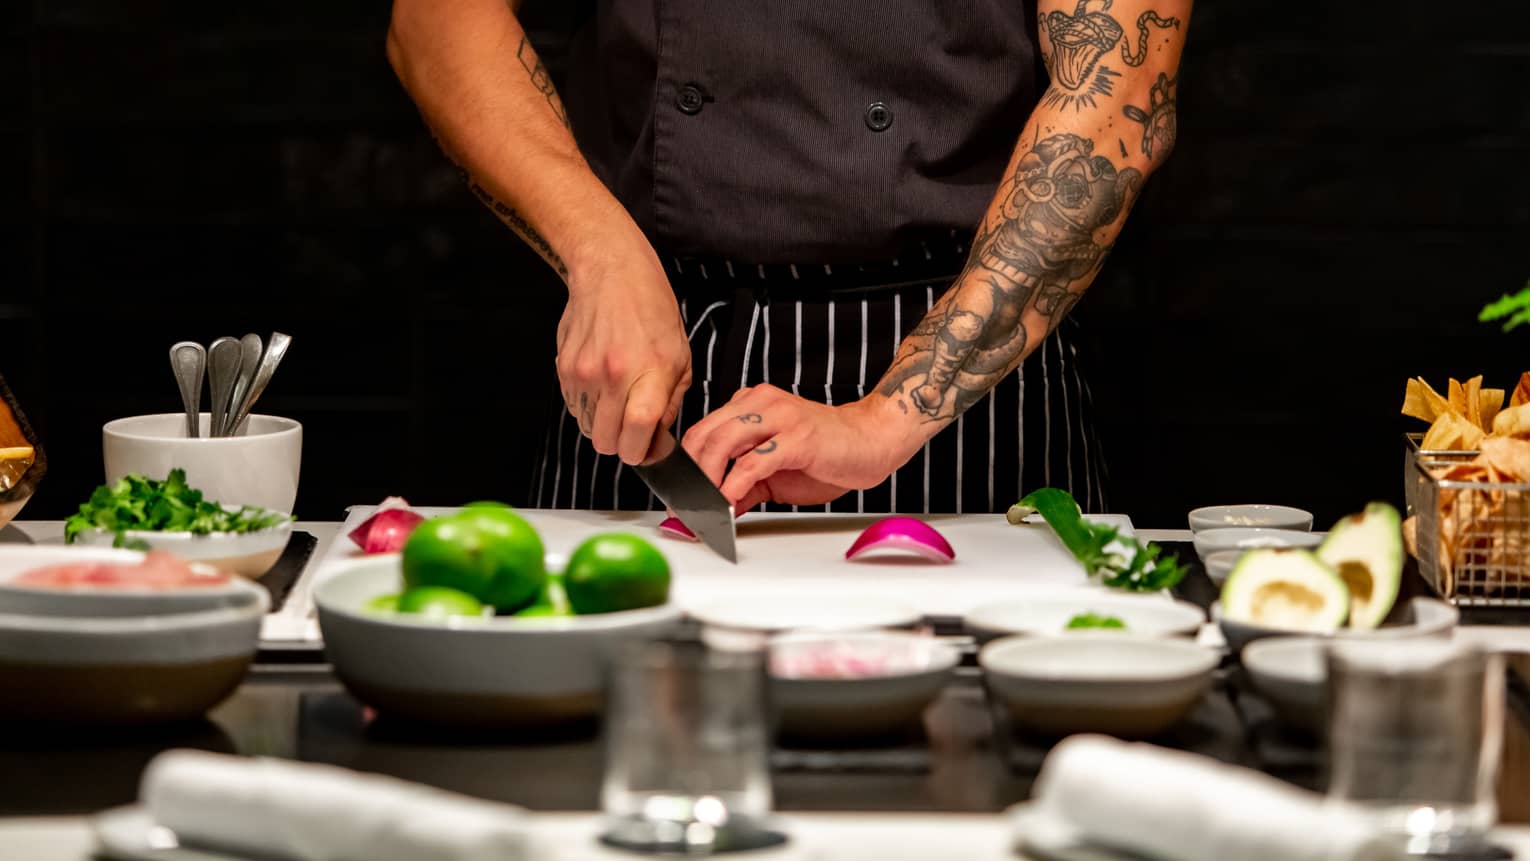 Close up of chef with tattoos on his arm slicing a red onion